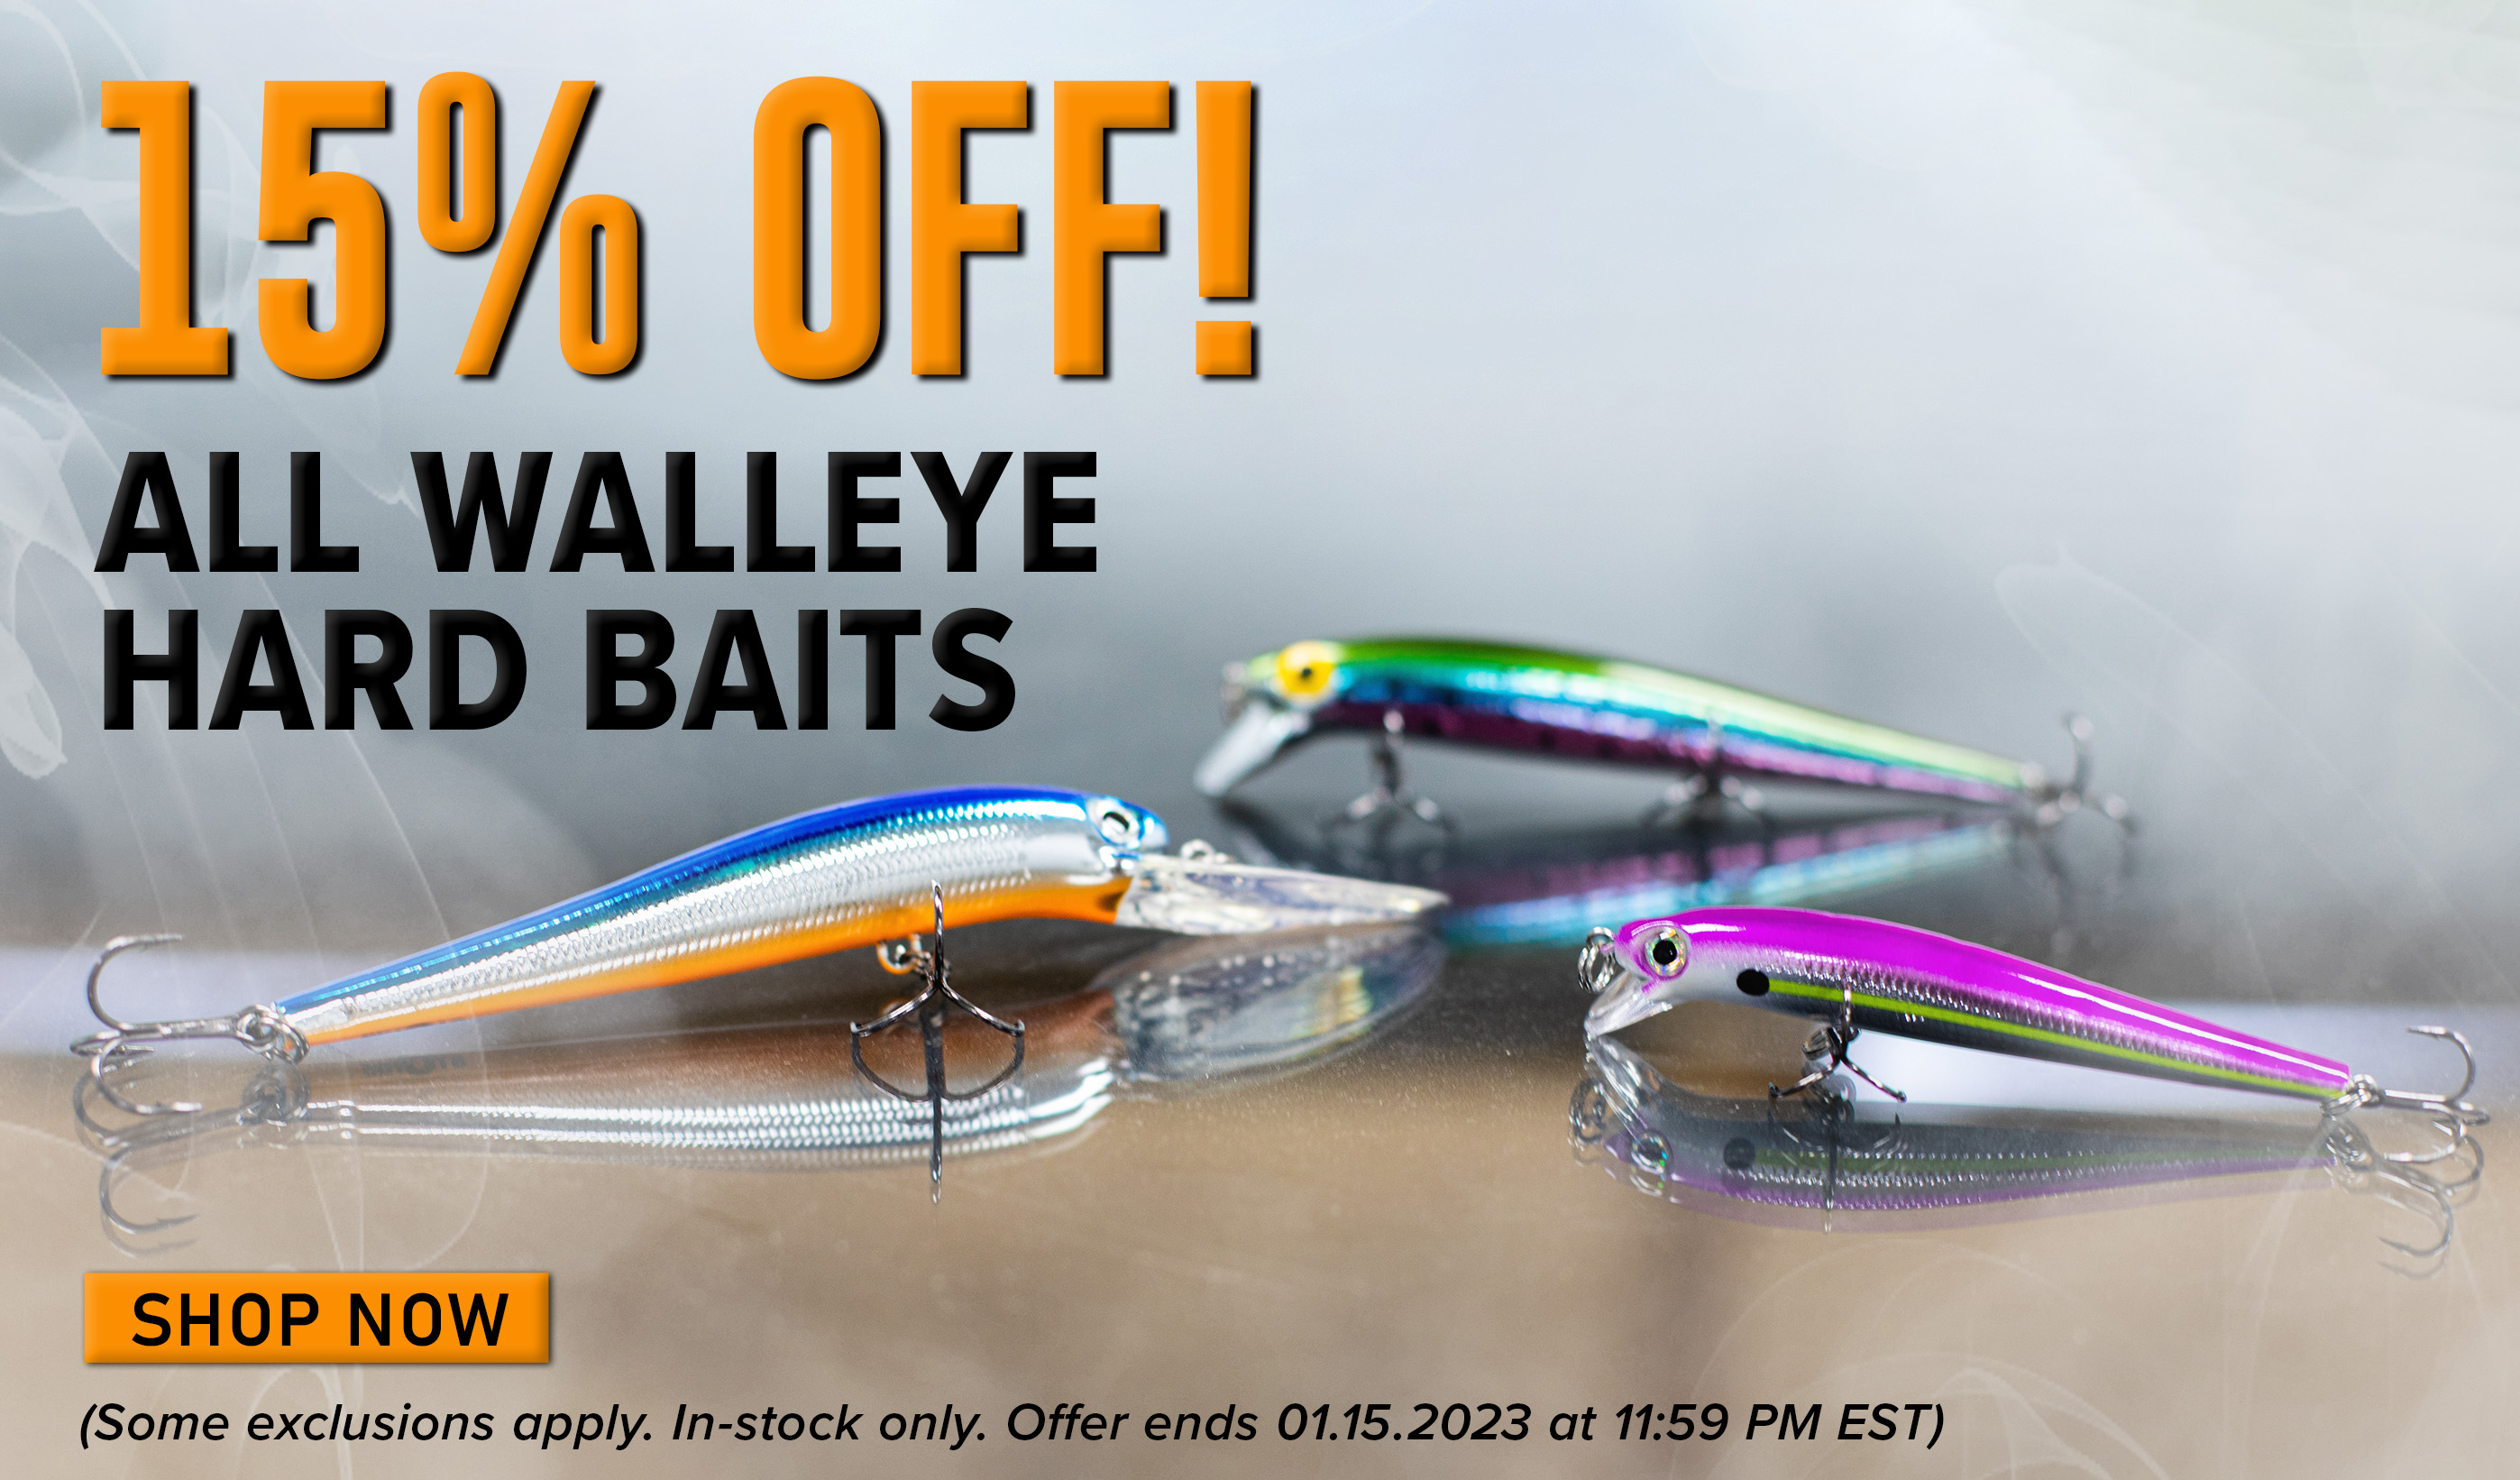 Walleye Rods, Reels, & Baits All On Sale Right Now! - Fish USA